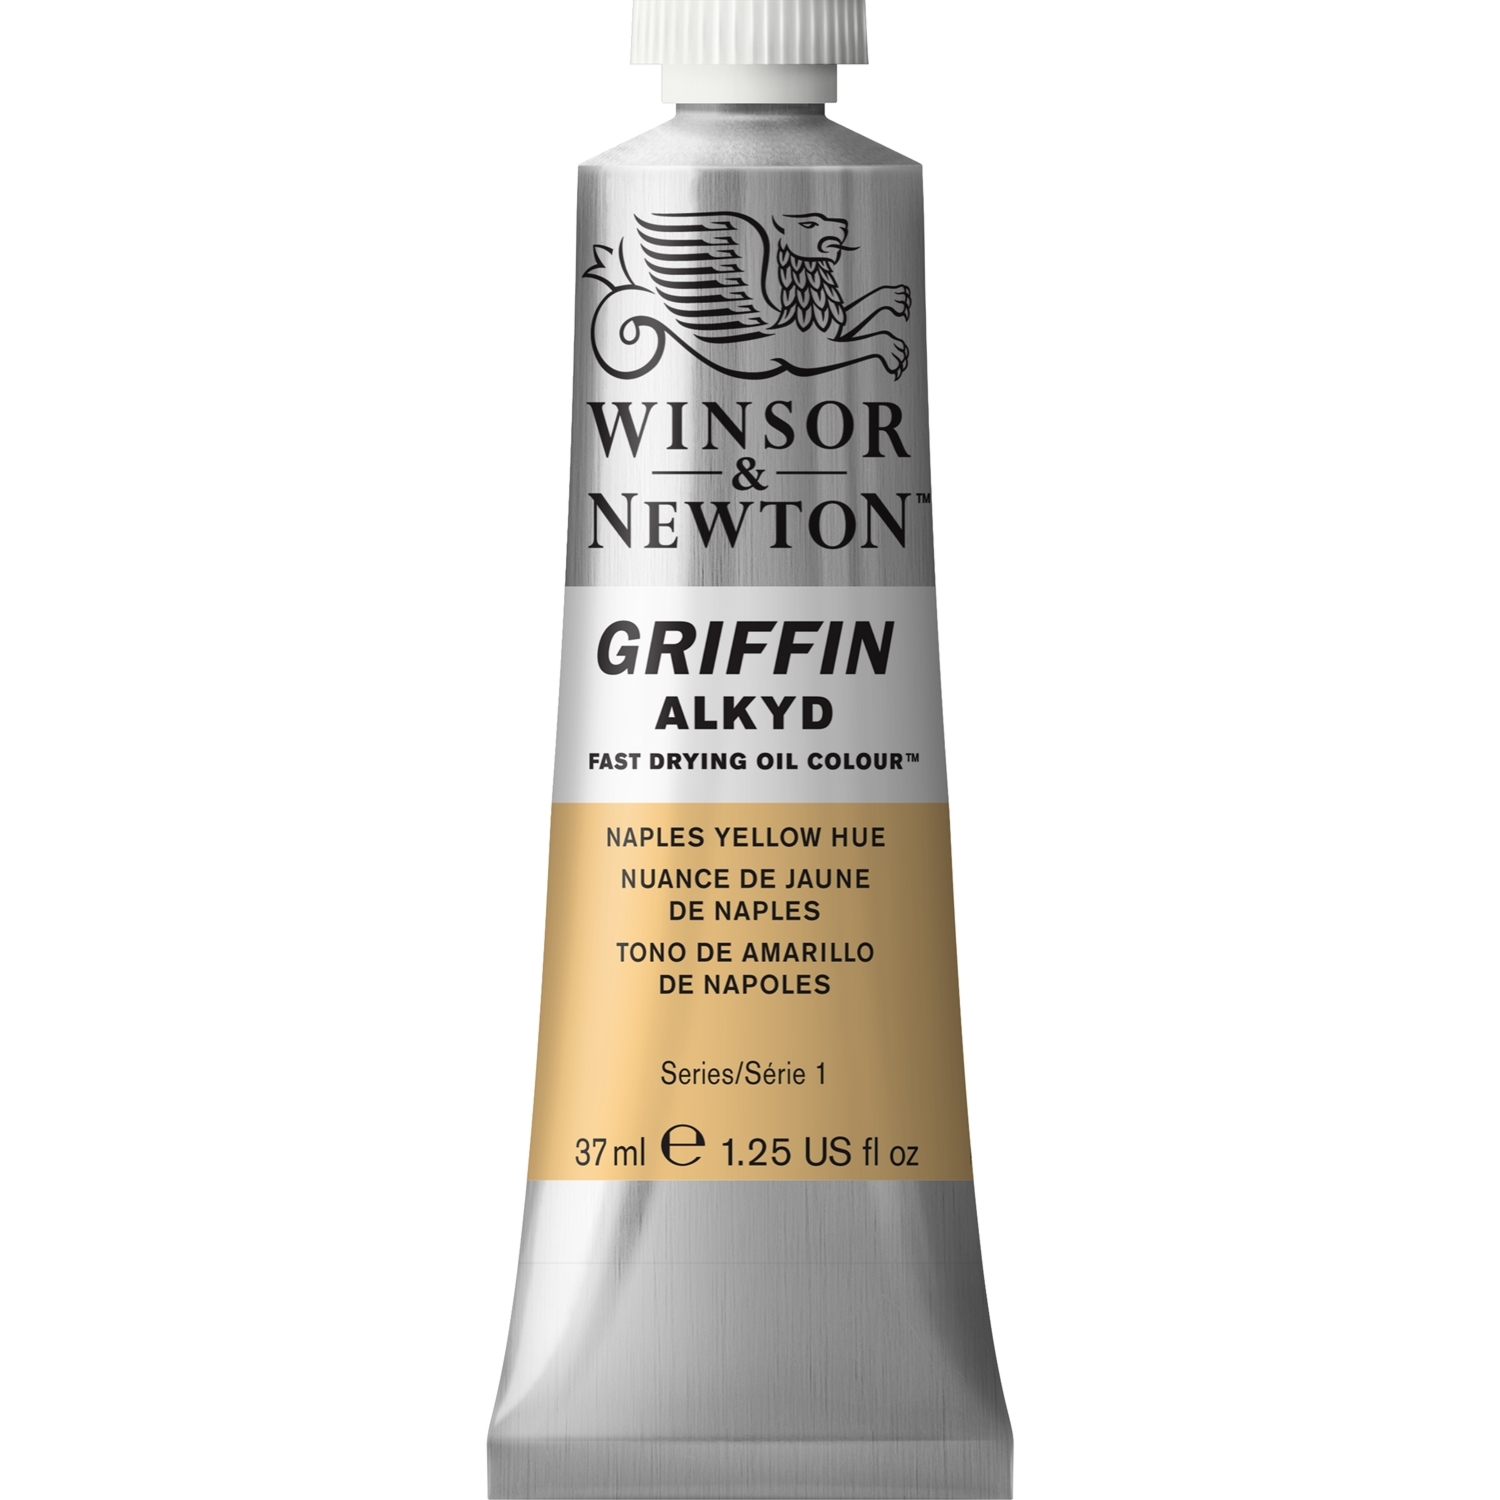 Winsor and Newton Griffin Alkyd Oil Colour - Naples Yellow Hue Image 1